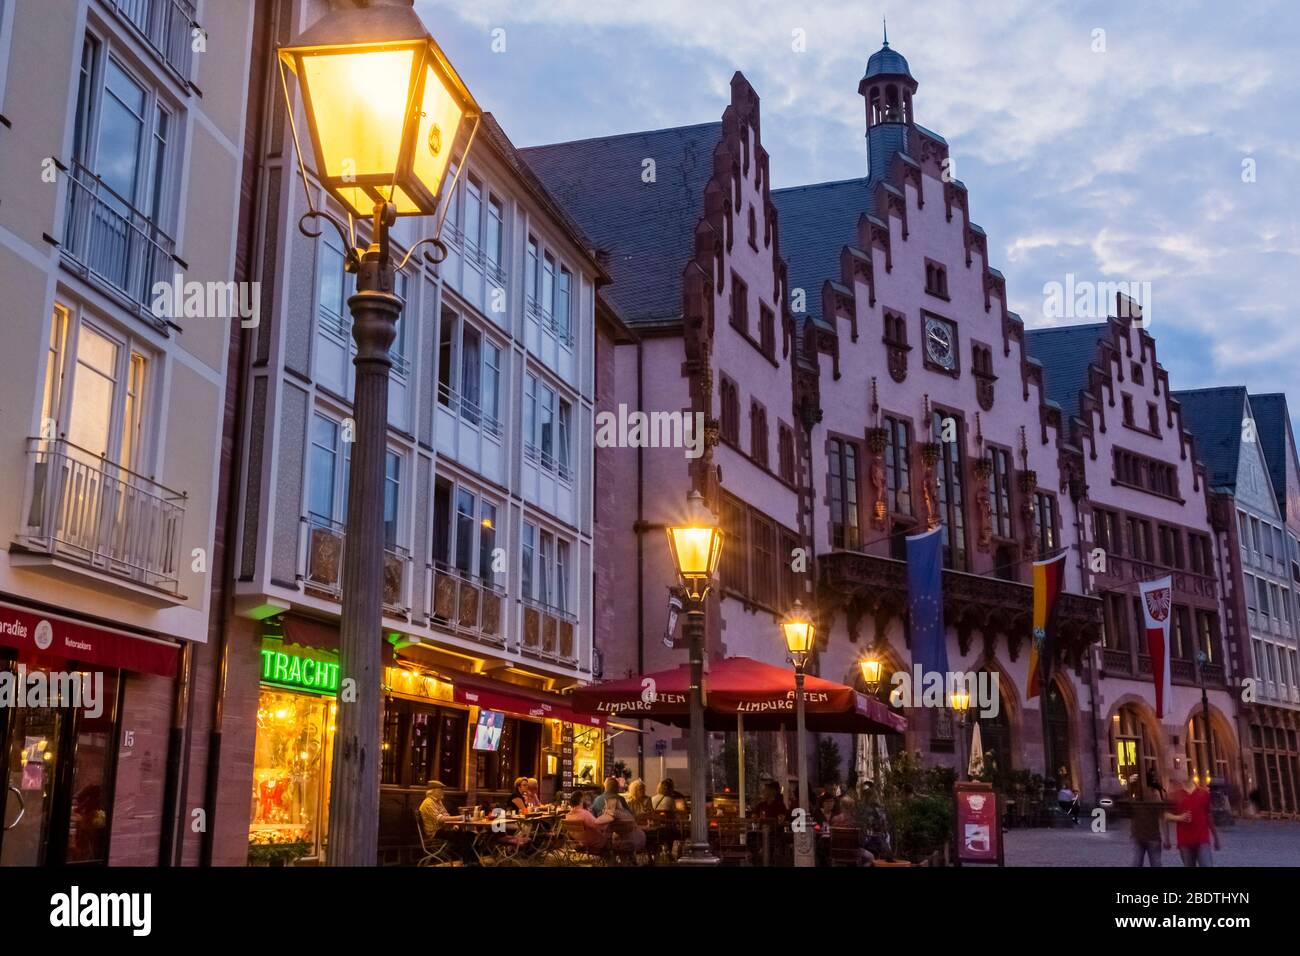 Tourists and locals eating and drinking in the old town or Alstadt of Frankfurt. The reconstruction of Romer was completed in 2017. Stock Photo